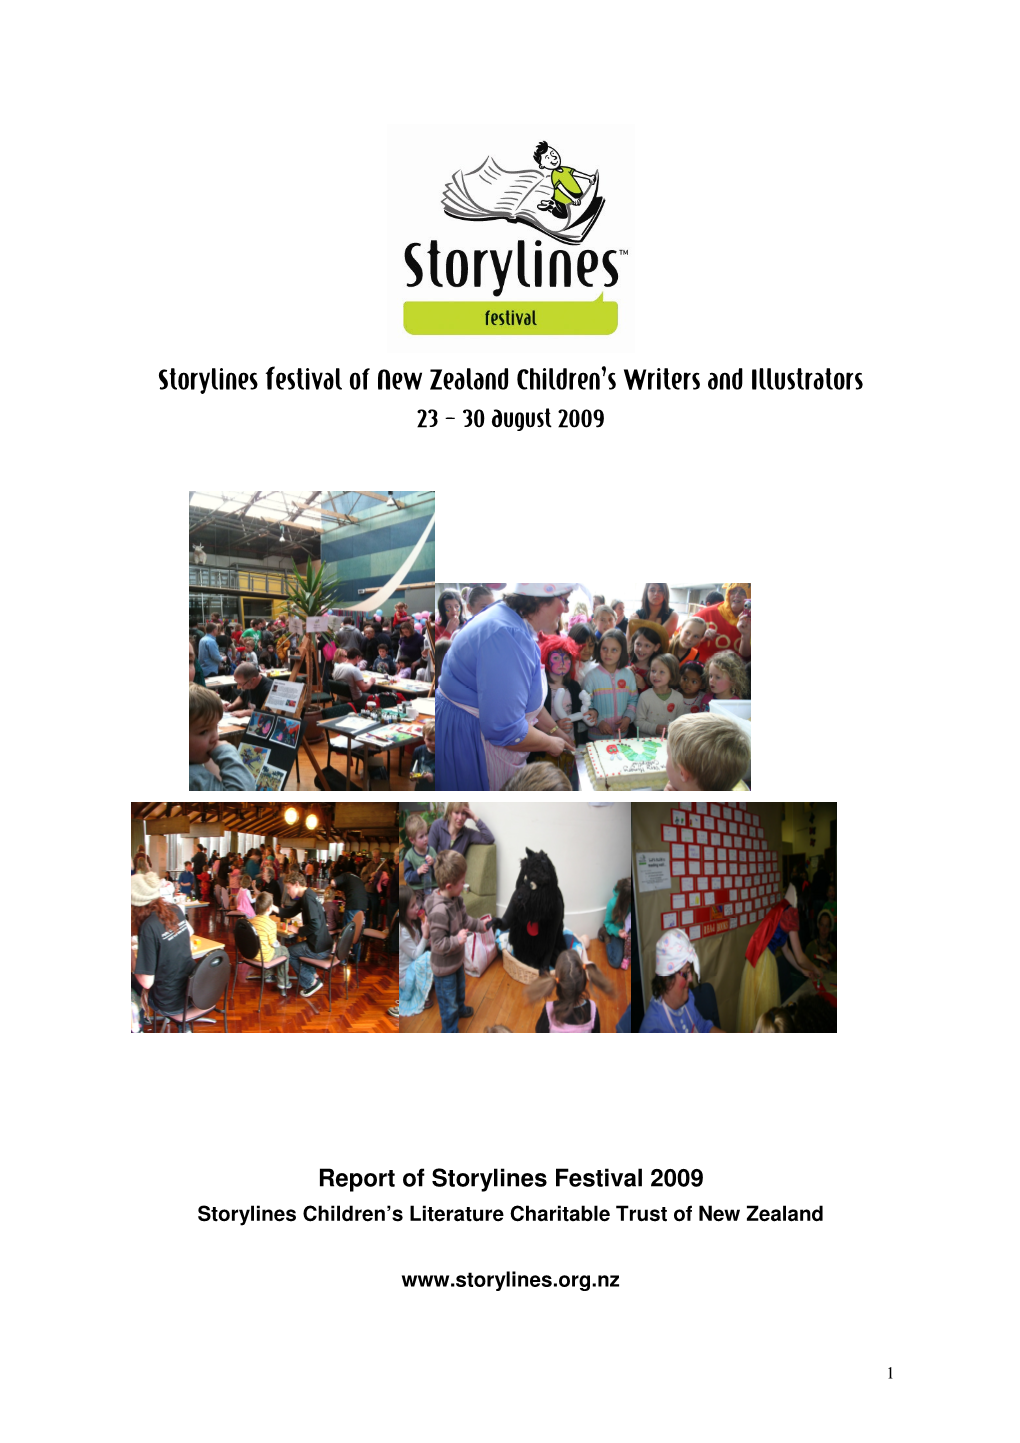 Storylines Festival of New Zealand Children's Writers and Illustrators